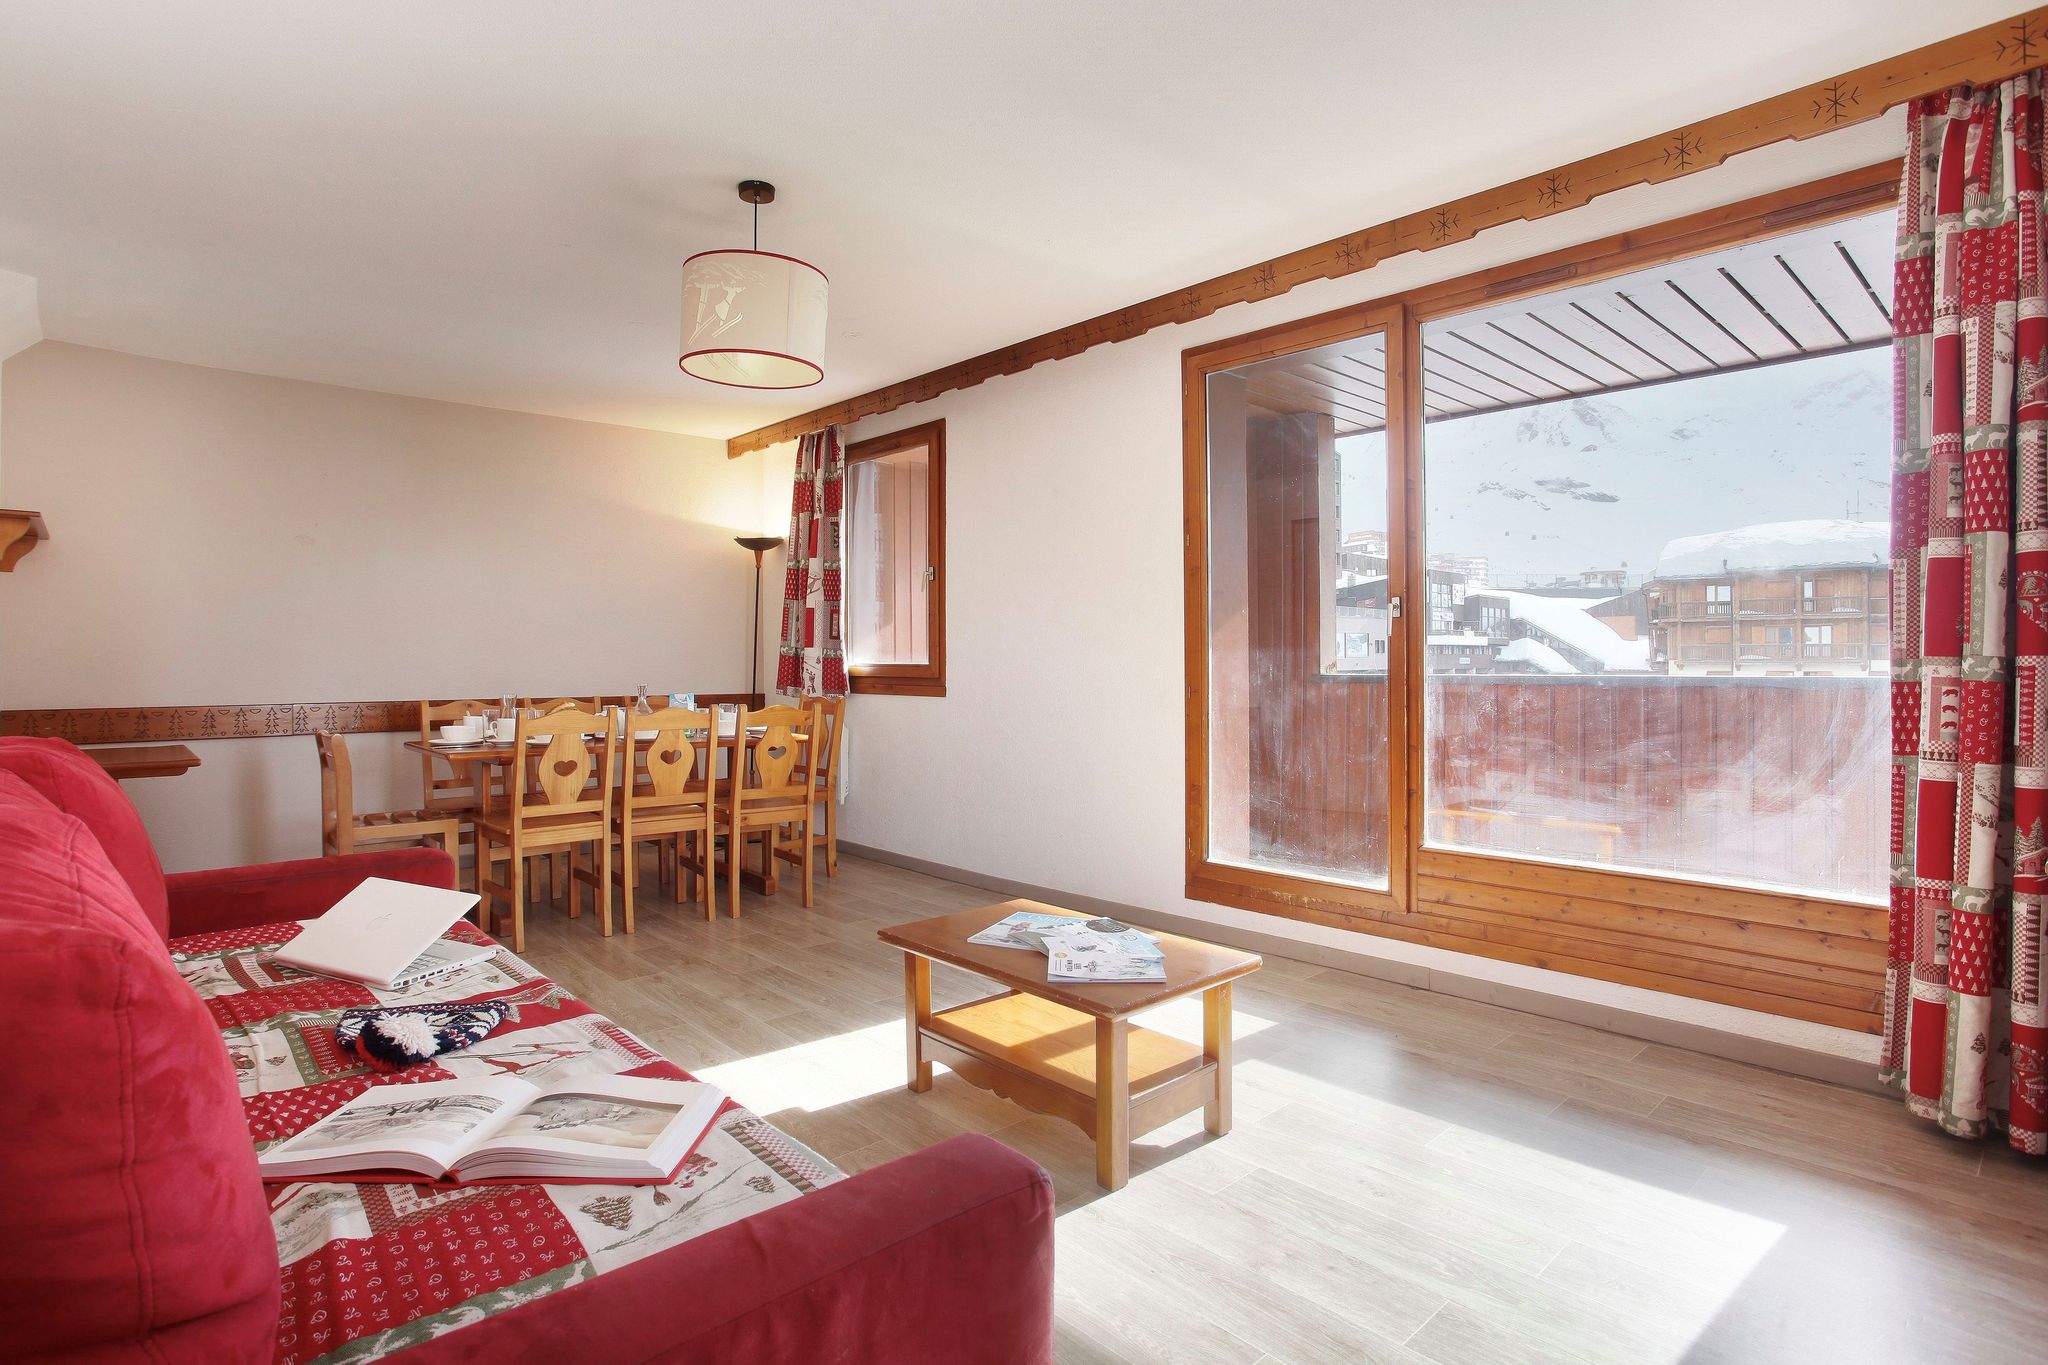 Apartment with a balcony or terrace near the ski slopes